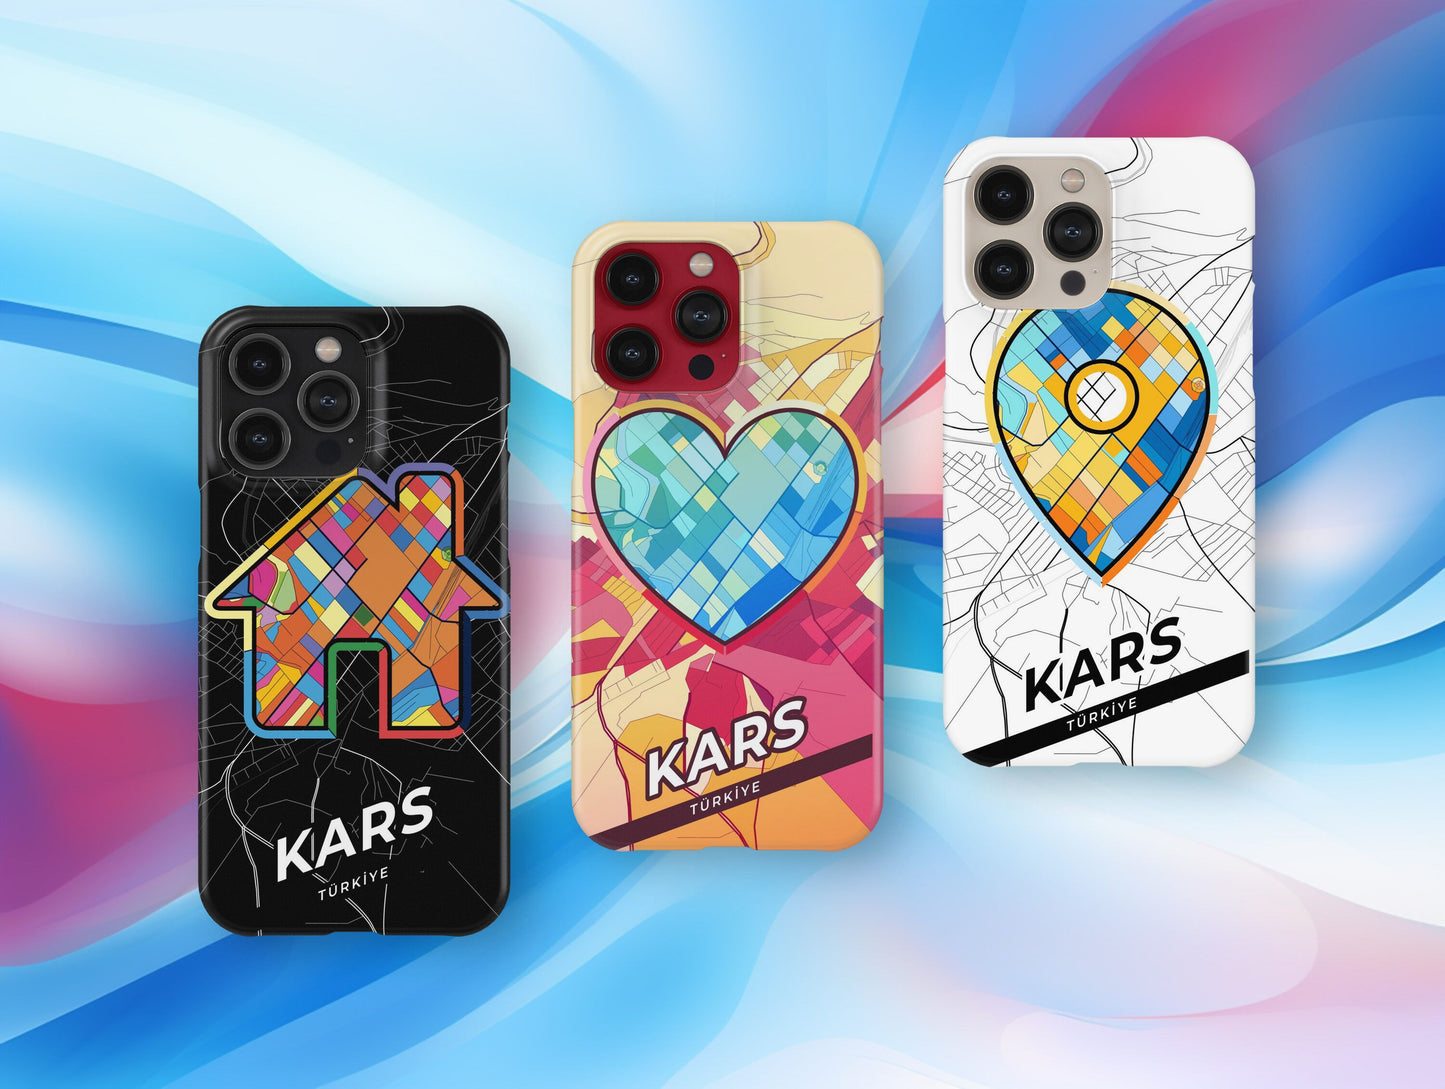 Kars Turkey slim phone case with colorful icon. Birthday, wedding or housewarming gift. Couple match cases.